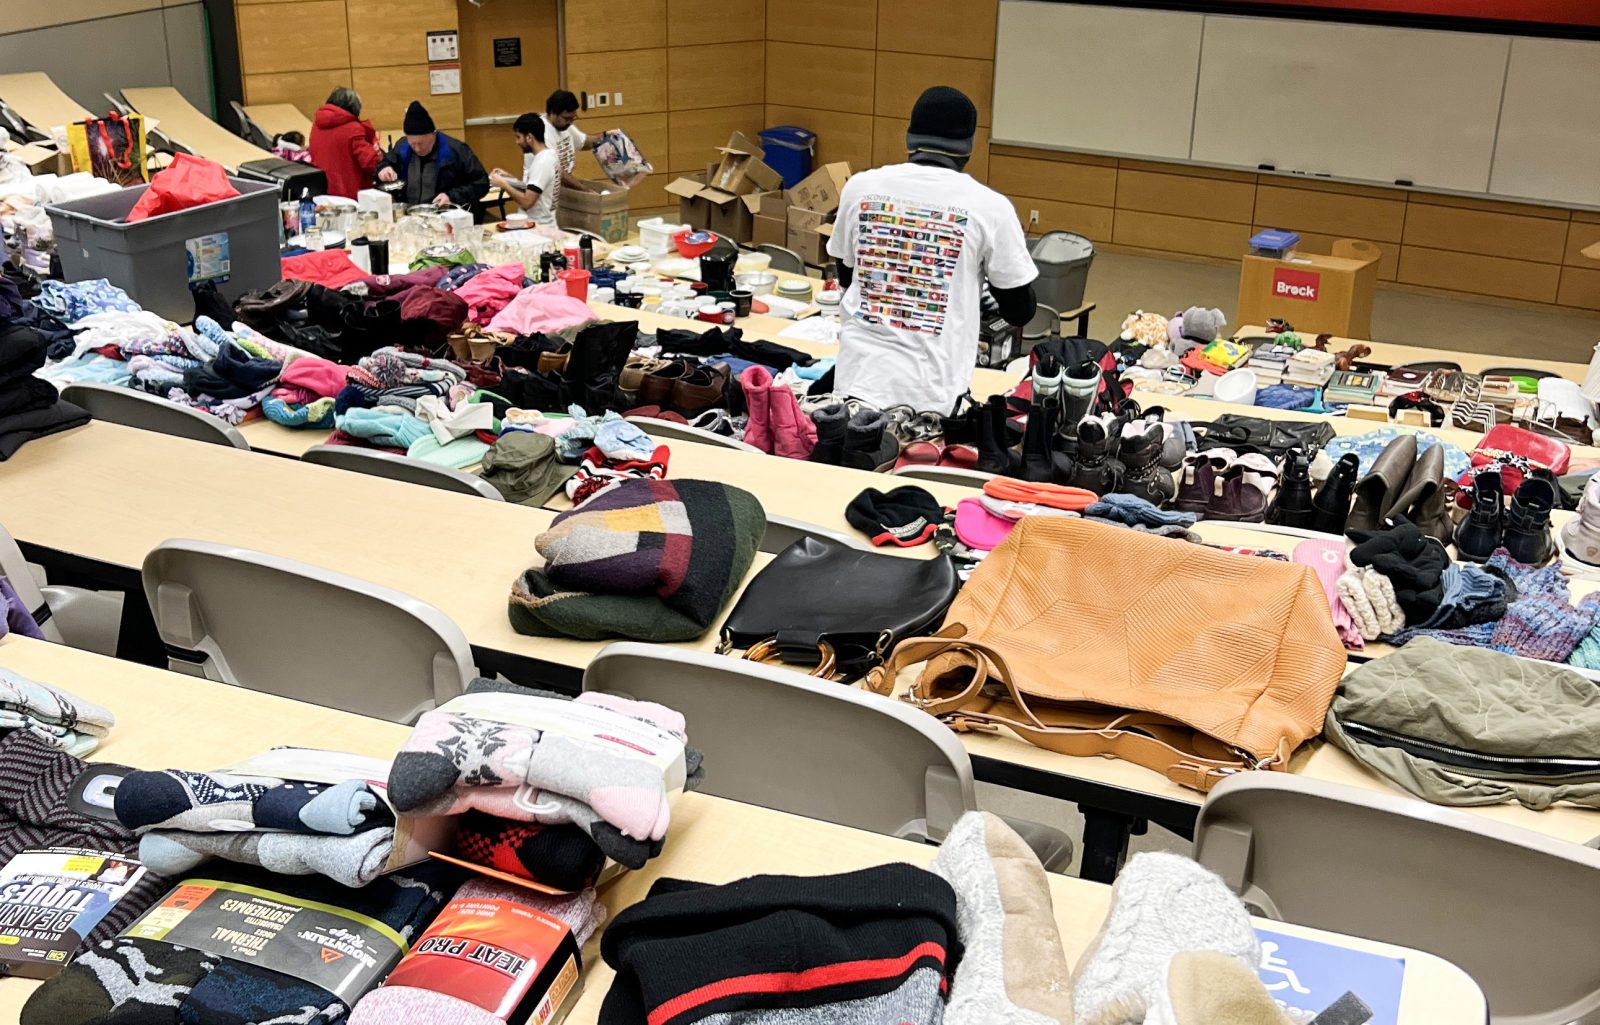 University student volunteers sort through clothing and household items on display.